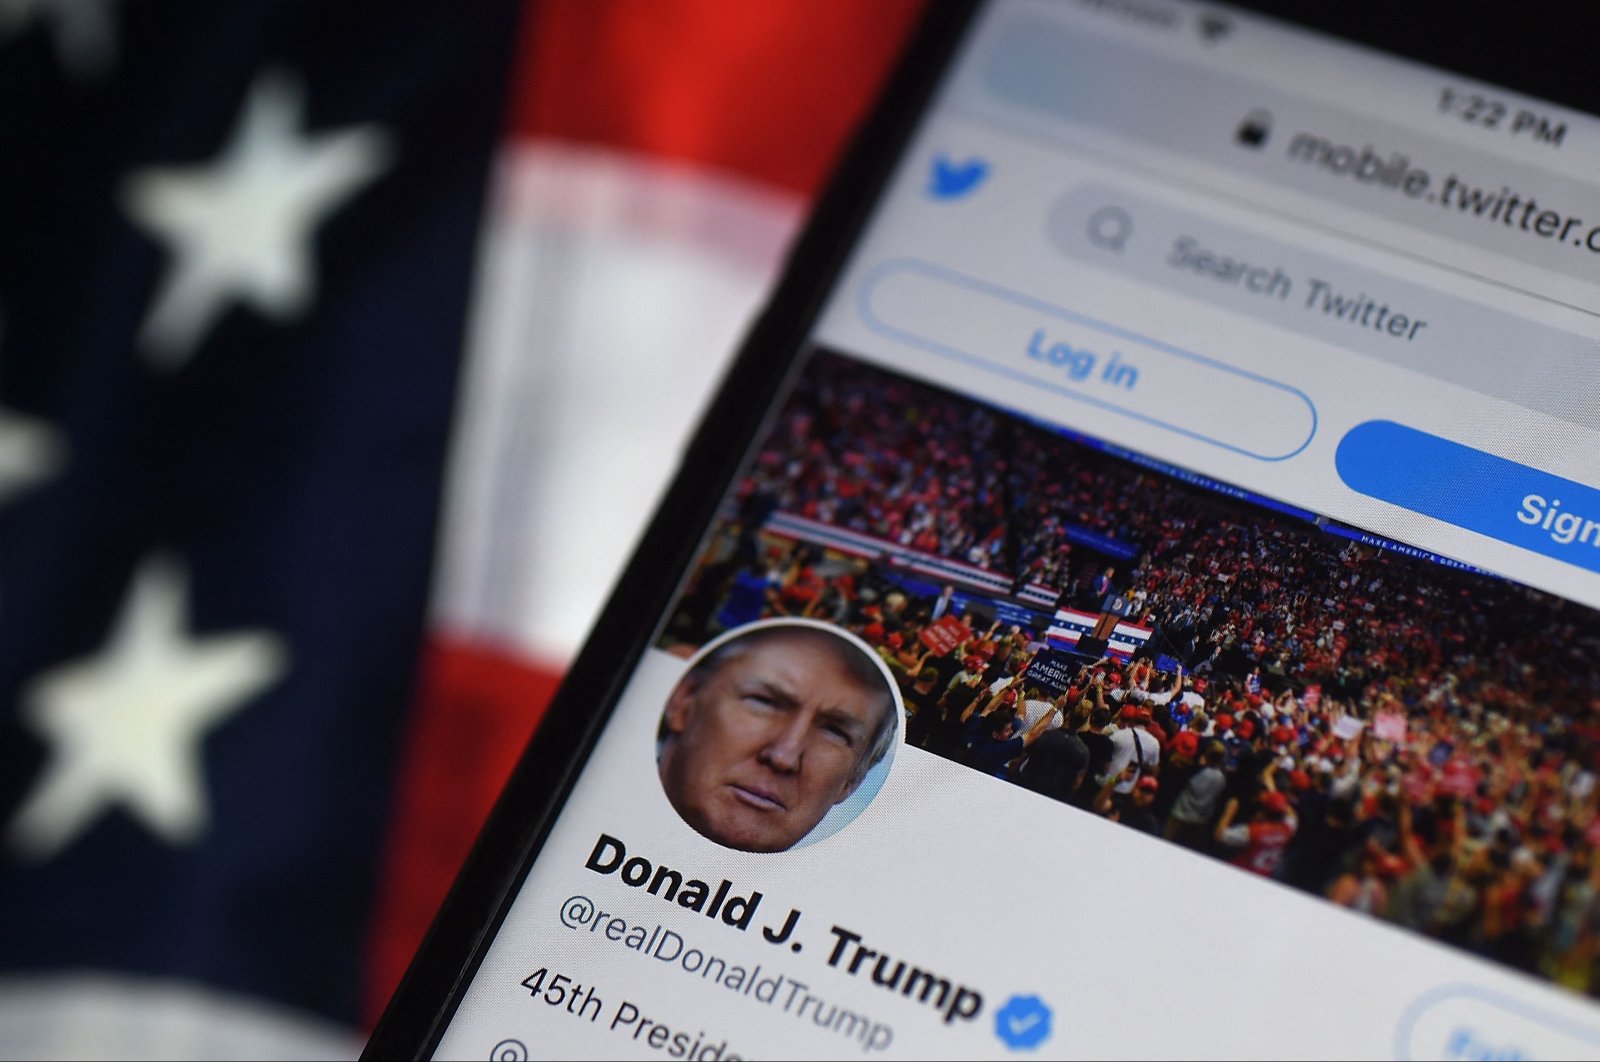 In this file photo illustration the Twitter account of former U.S. President Donald Trump is displayed on a mobile phone in Arlington, Virginia, U.S., Aug.,10, 2020. (AFP Photo)